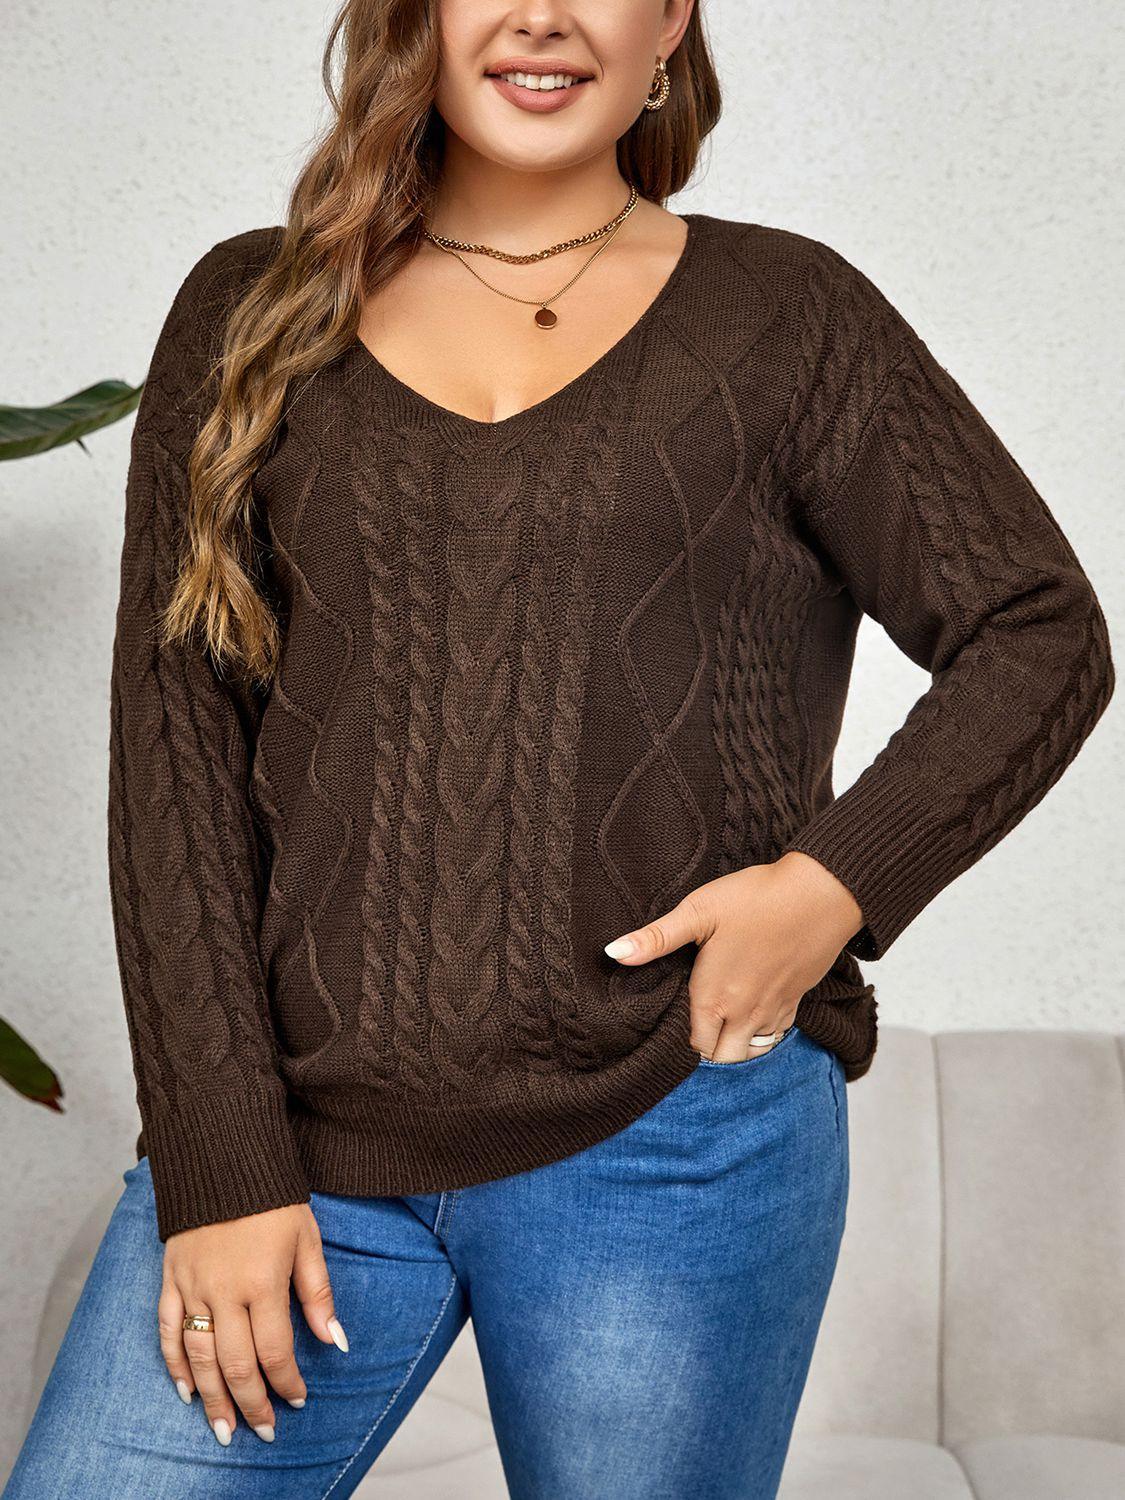 Chocolate Brown V-Neck Plus Size Cable Knit Sweater - MXSTUDIO.COM